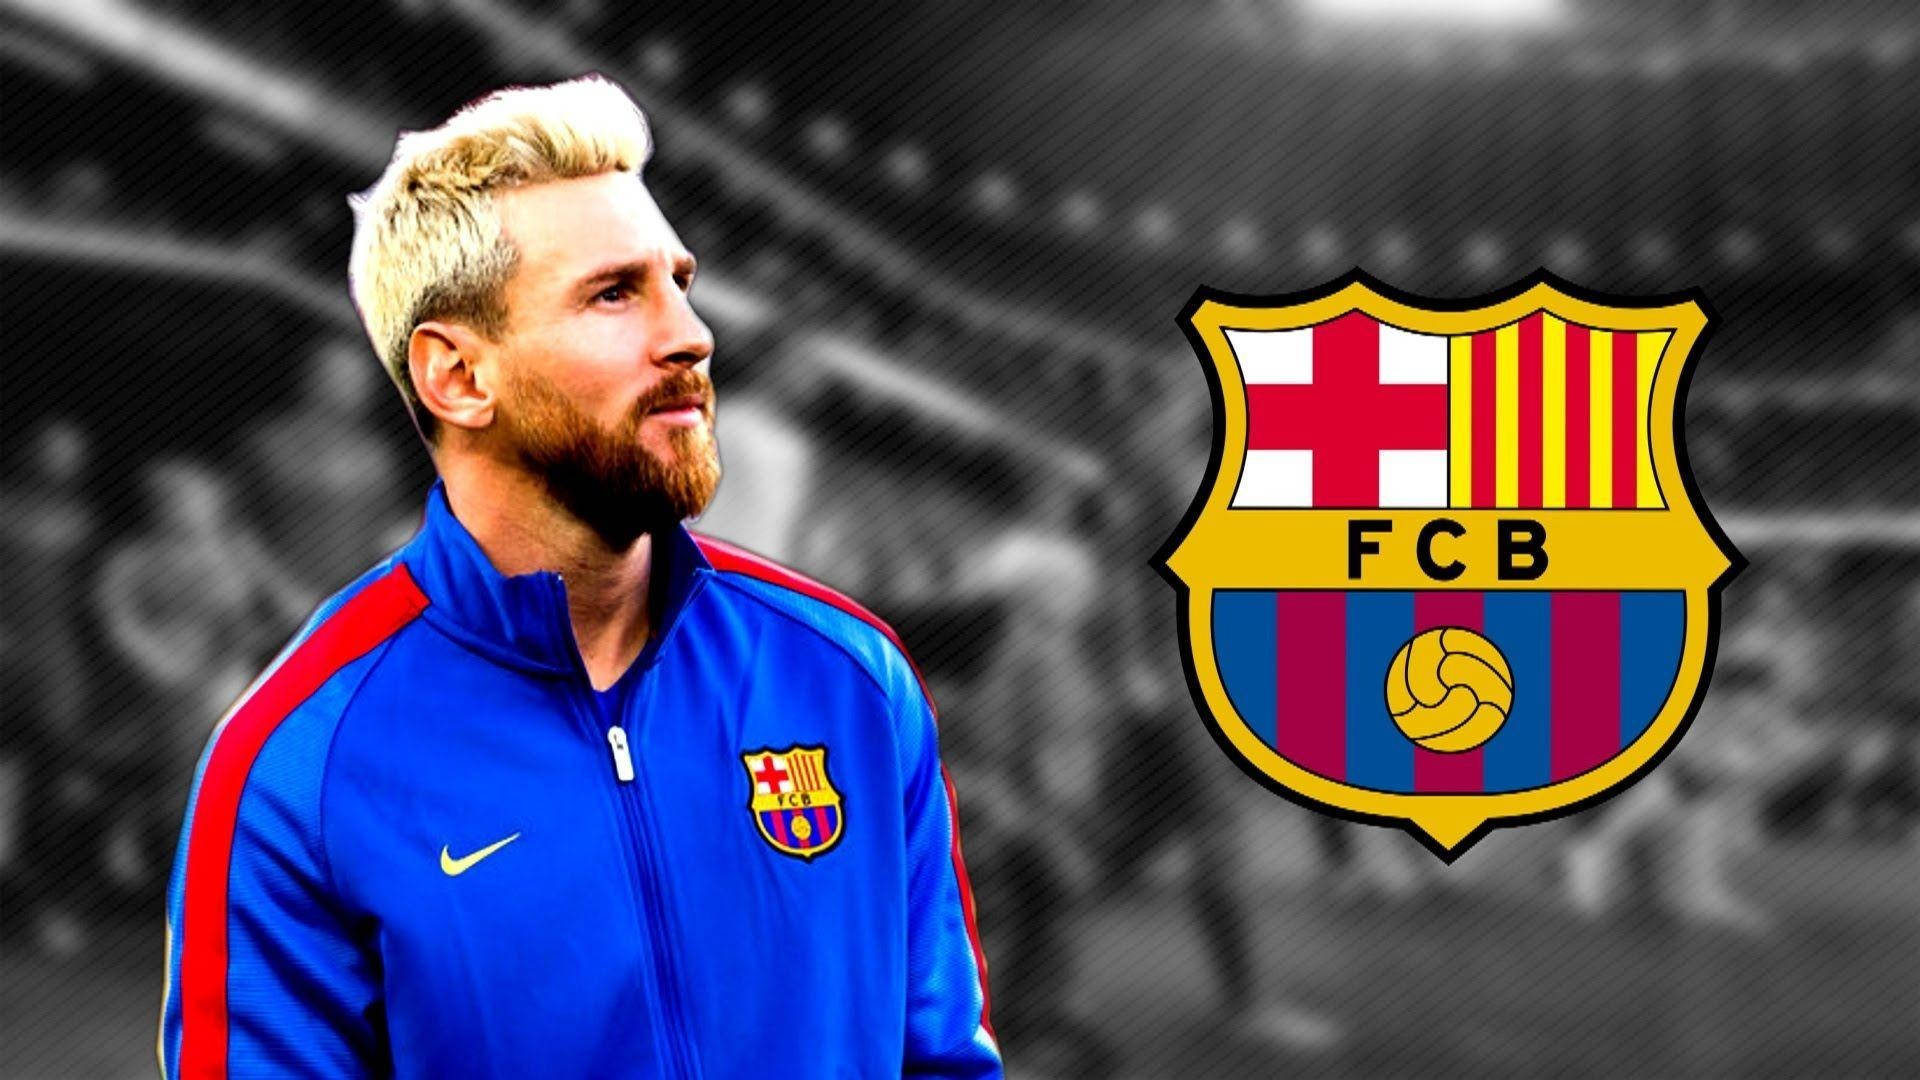 Download Messi With Fcb Logo Wallpaper 